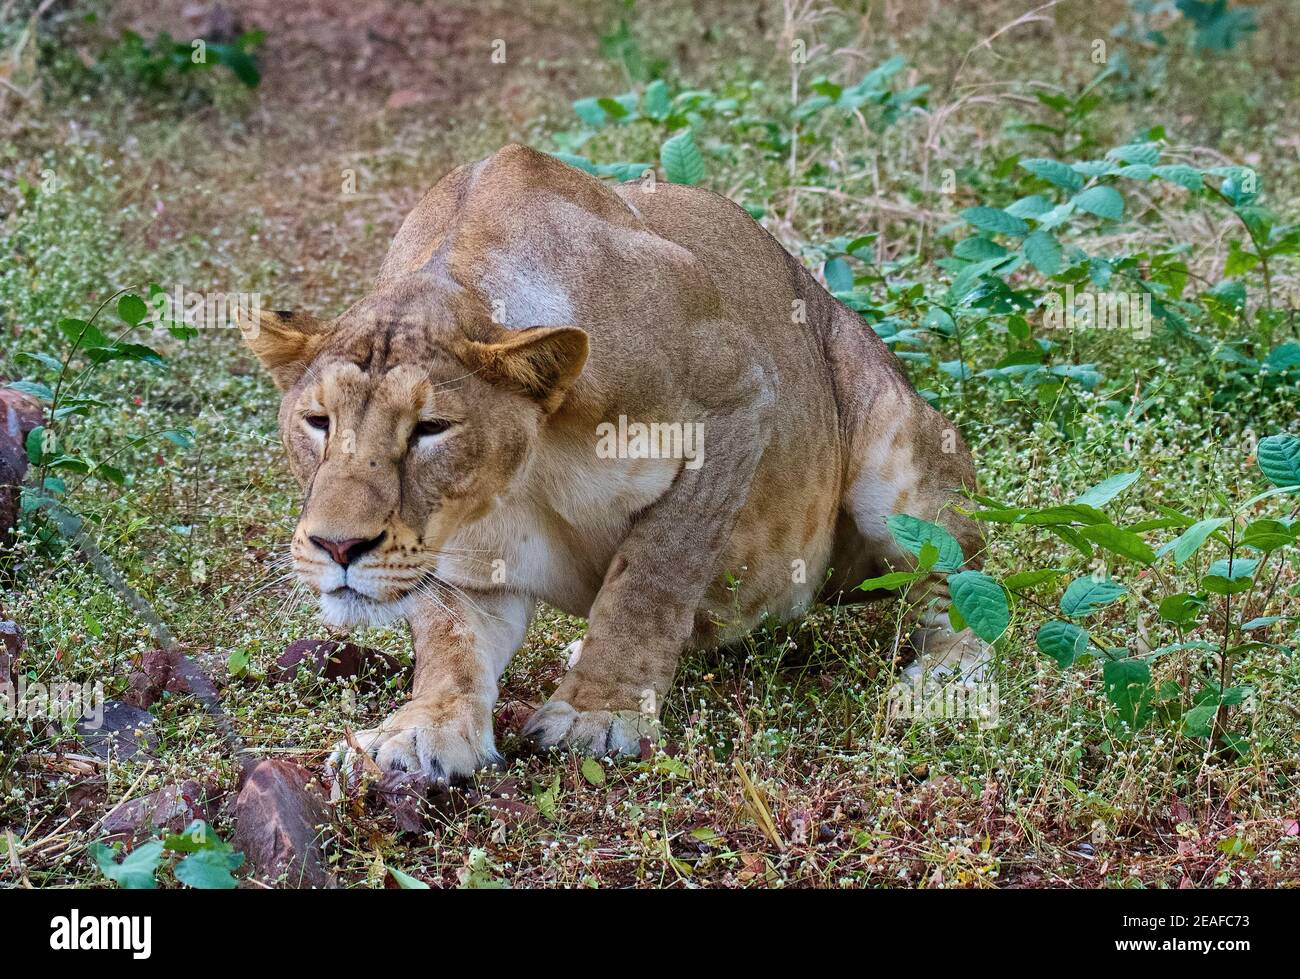 King of Jungle -- Asiatic Lion Stock Photo